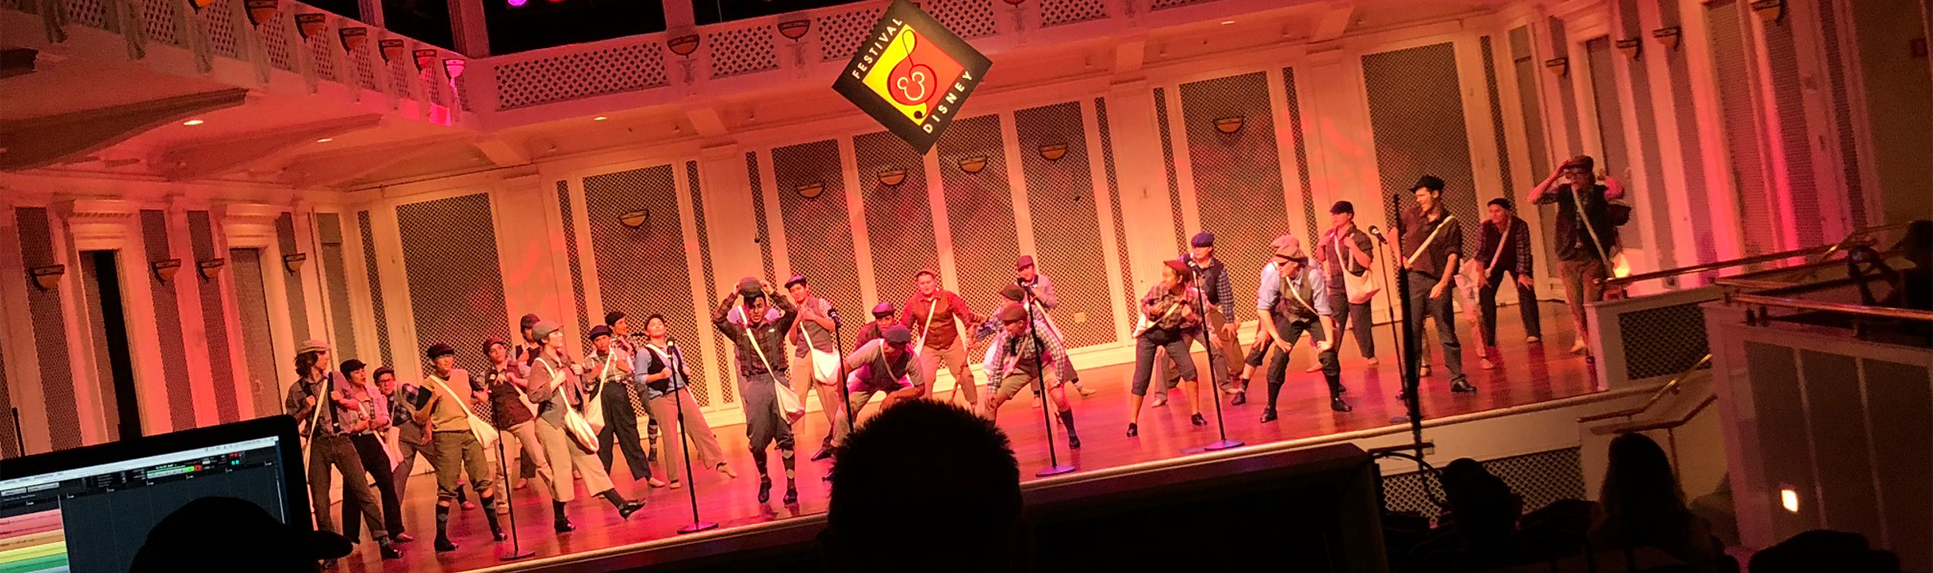 A group of Disney Imagination Campus students give a live performance on a stage